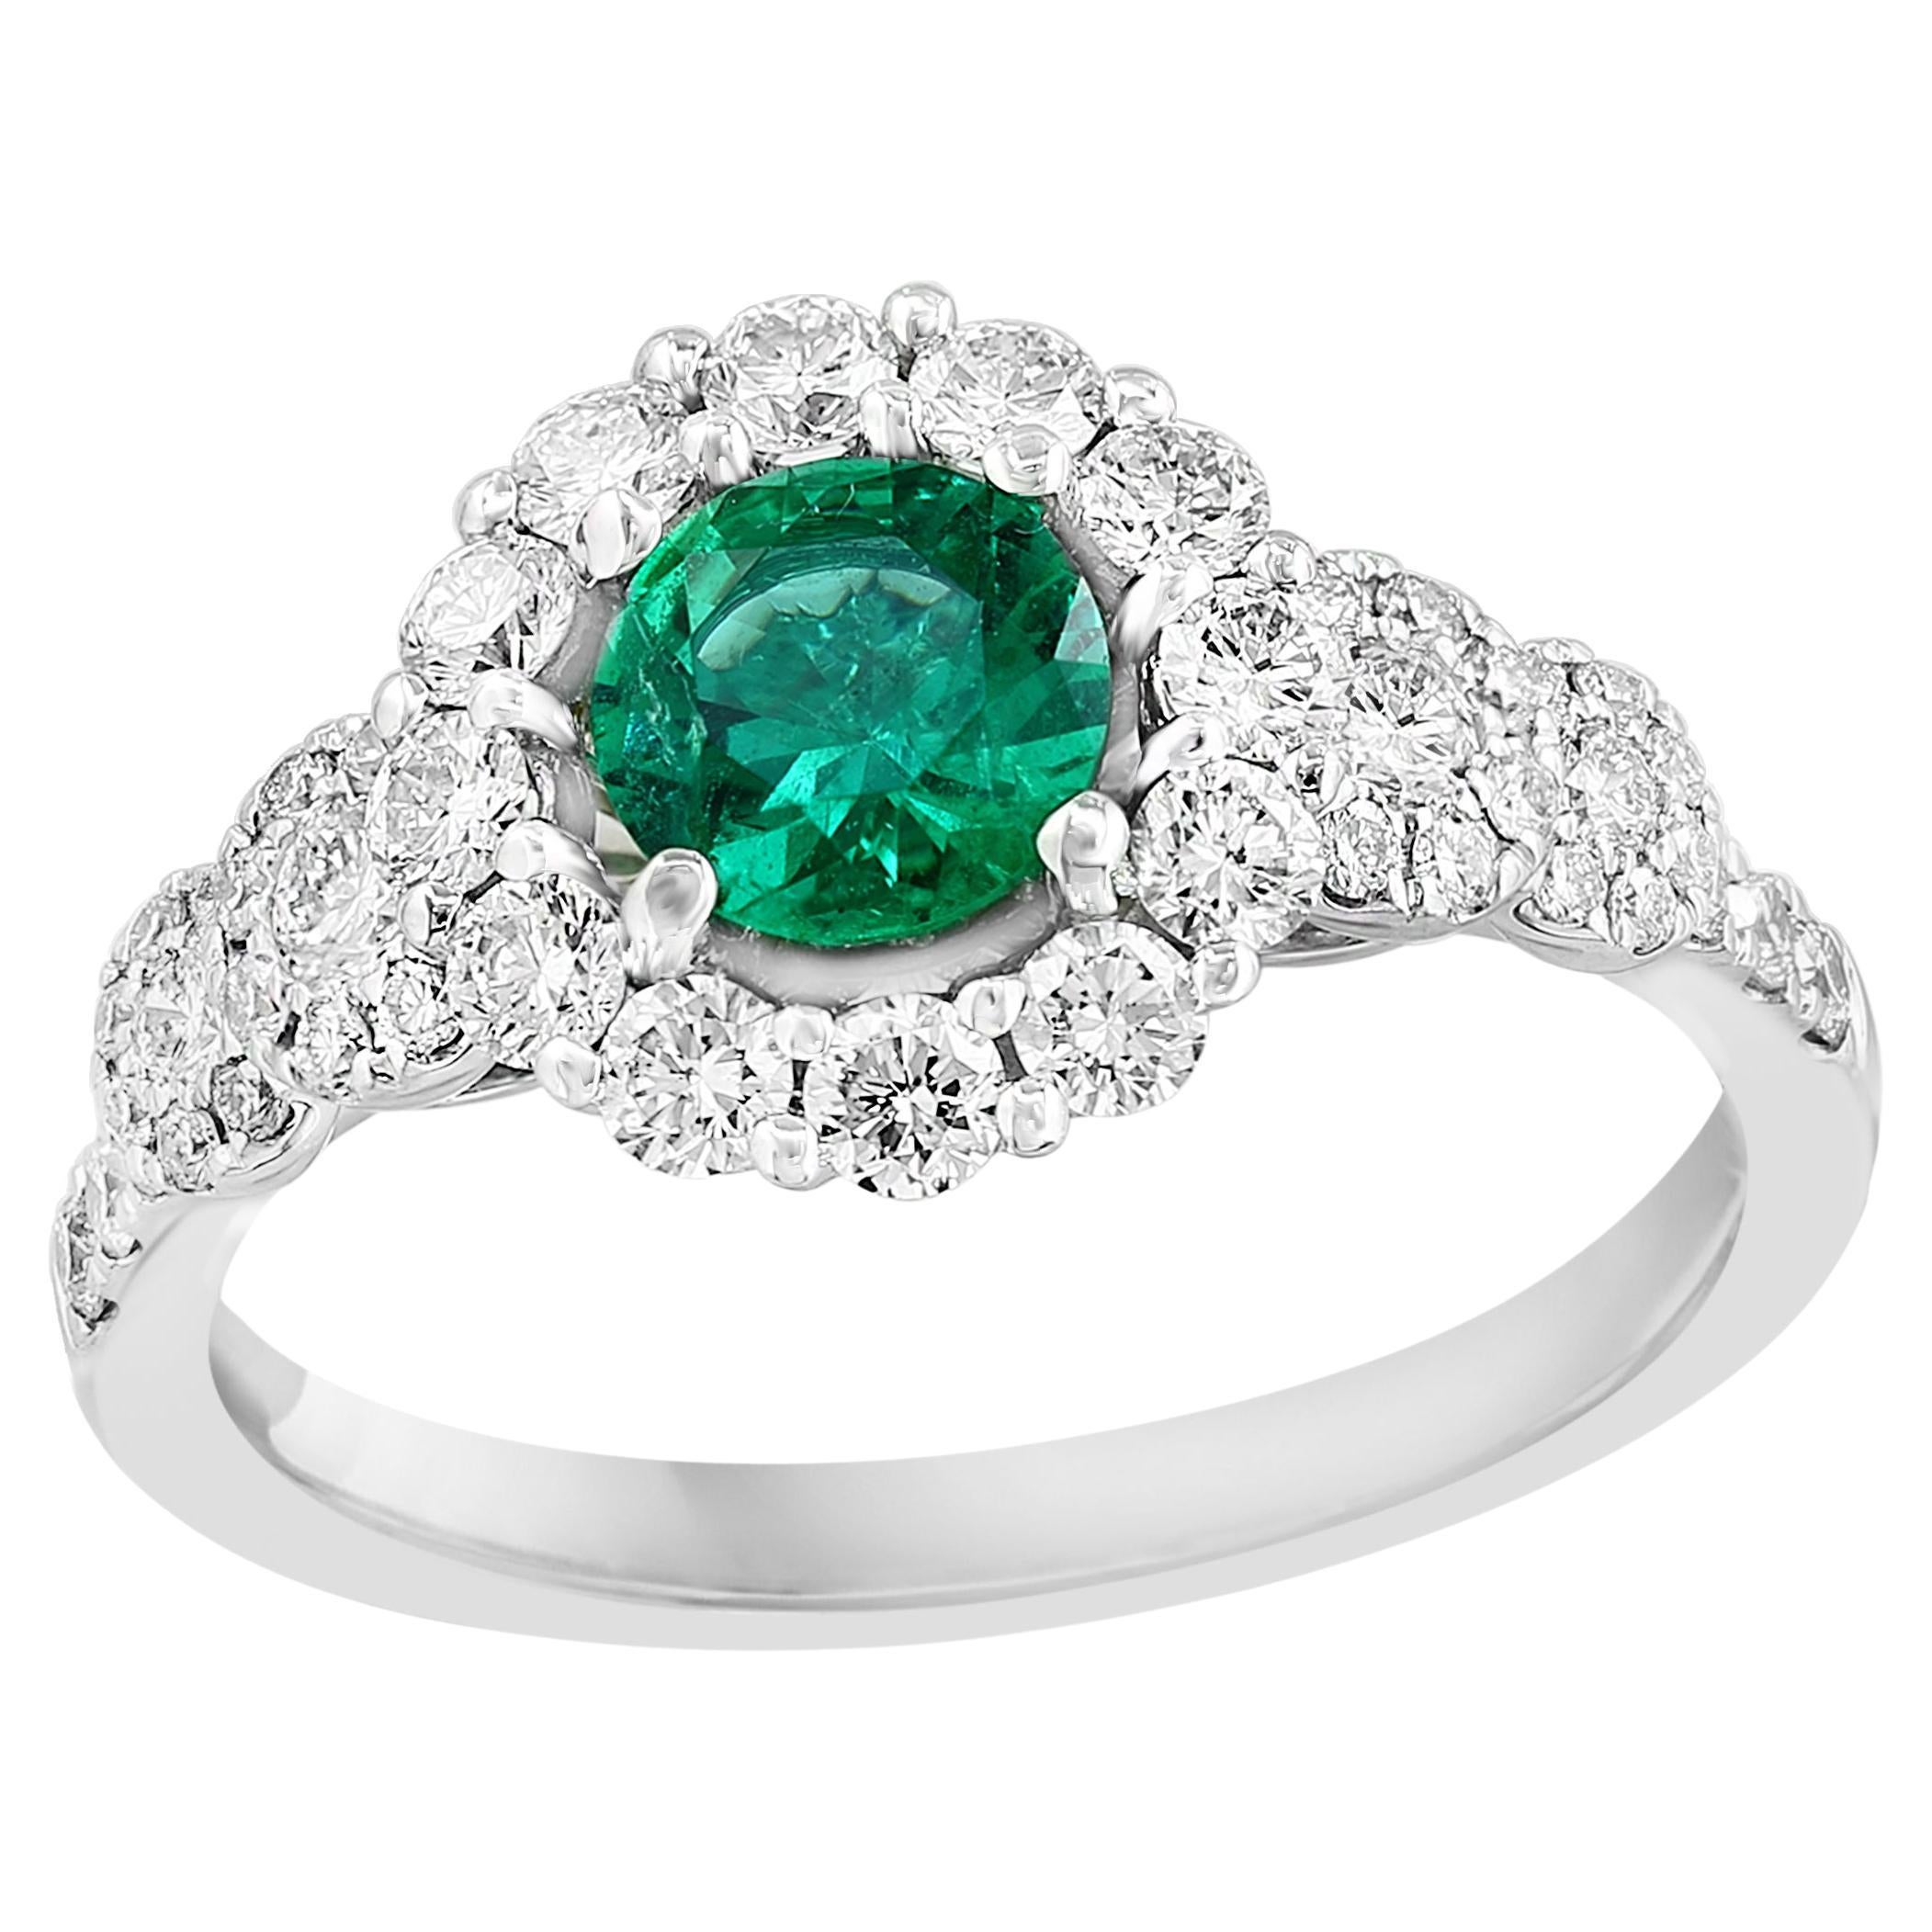 0.62 Carat Round Cut Emerald and Diamond Fashion Ring in 18k White Gold